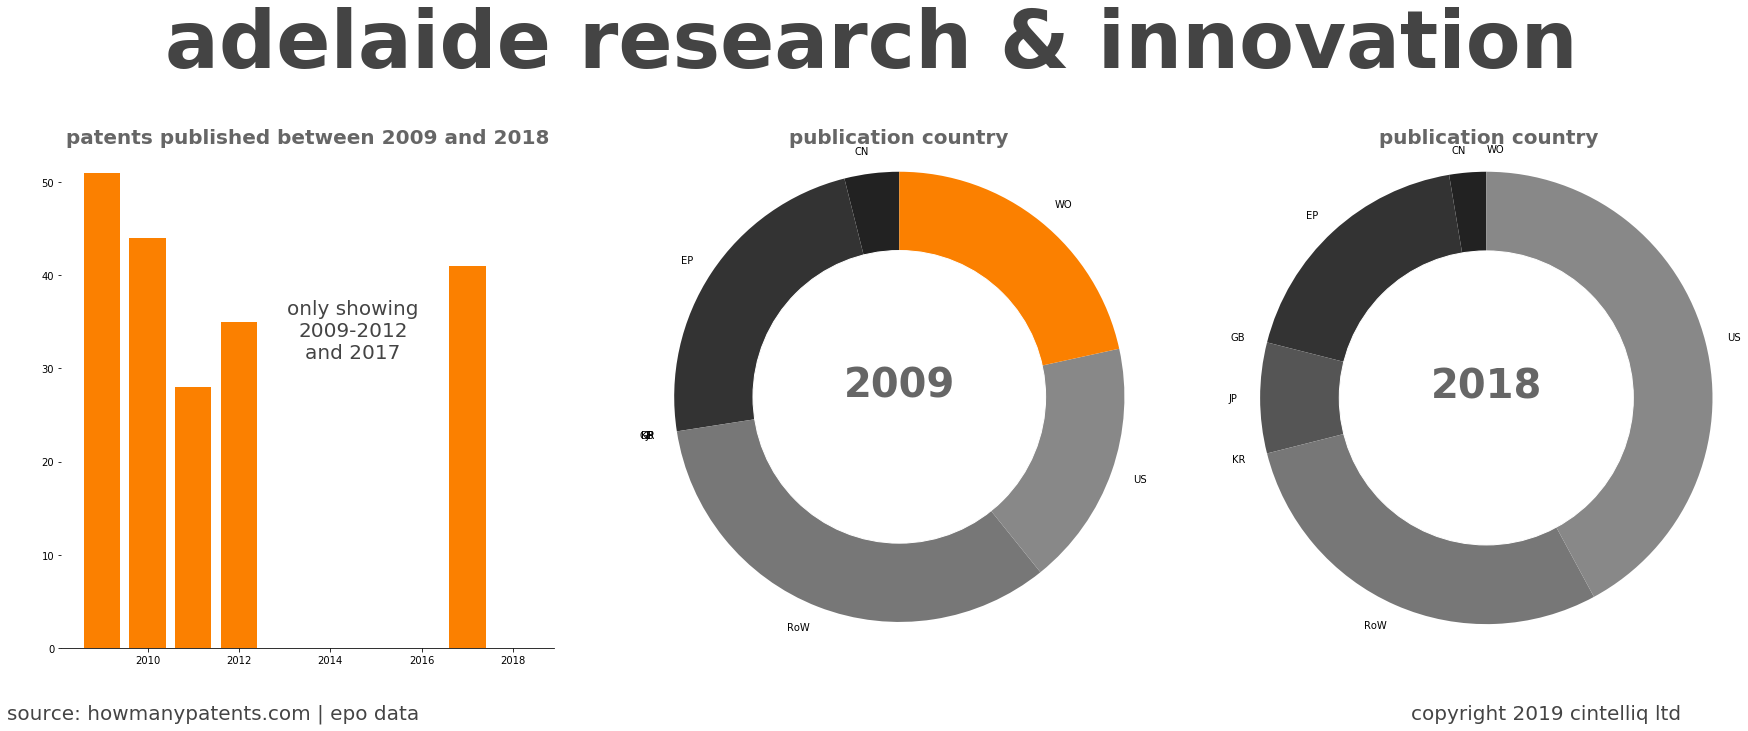 summary of patents for Adelaide Research & Innovation